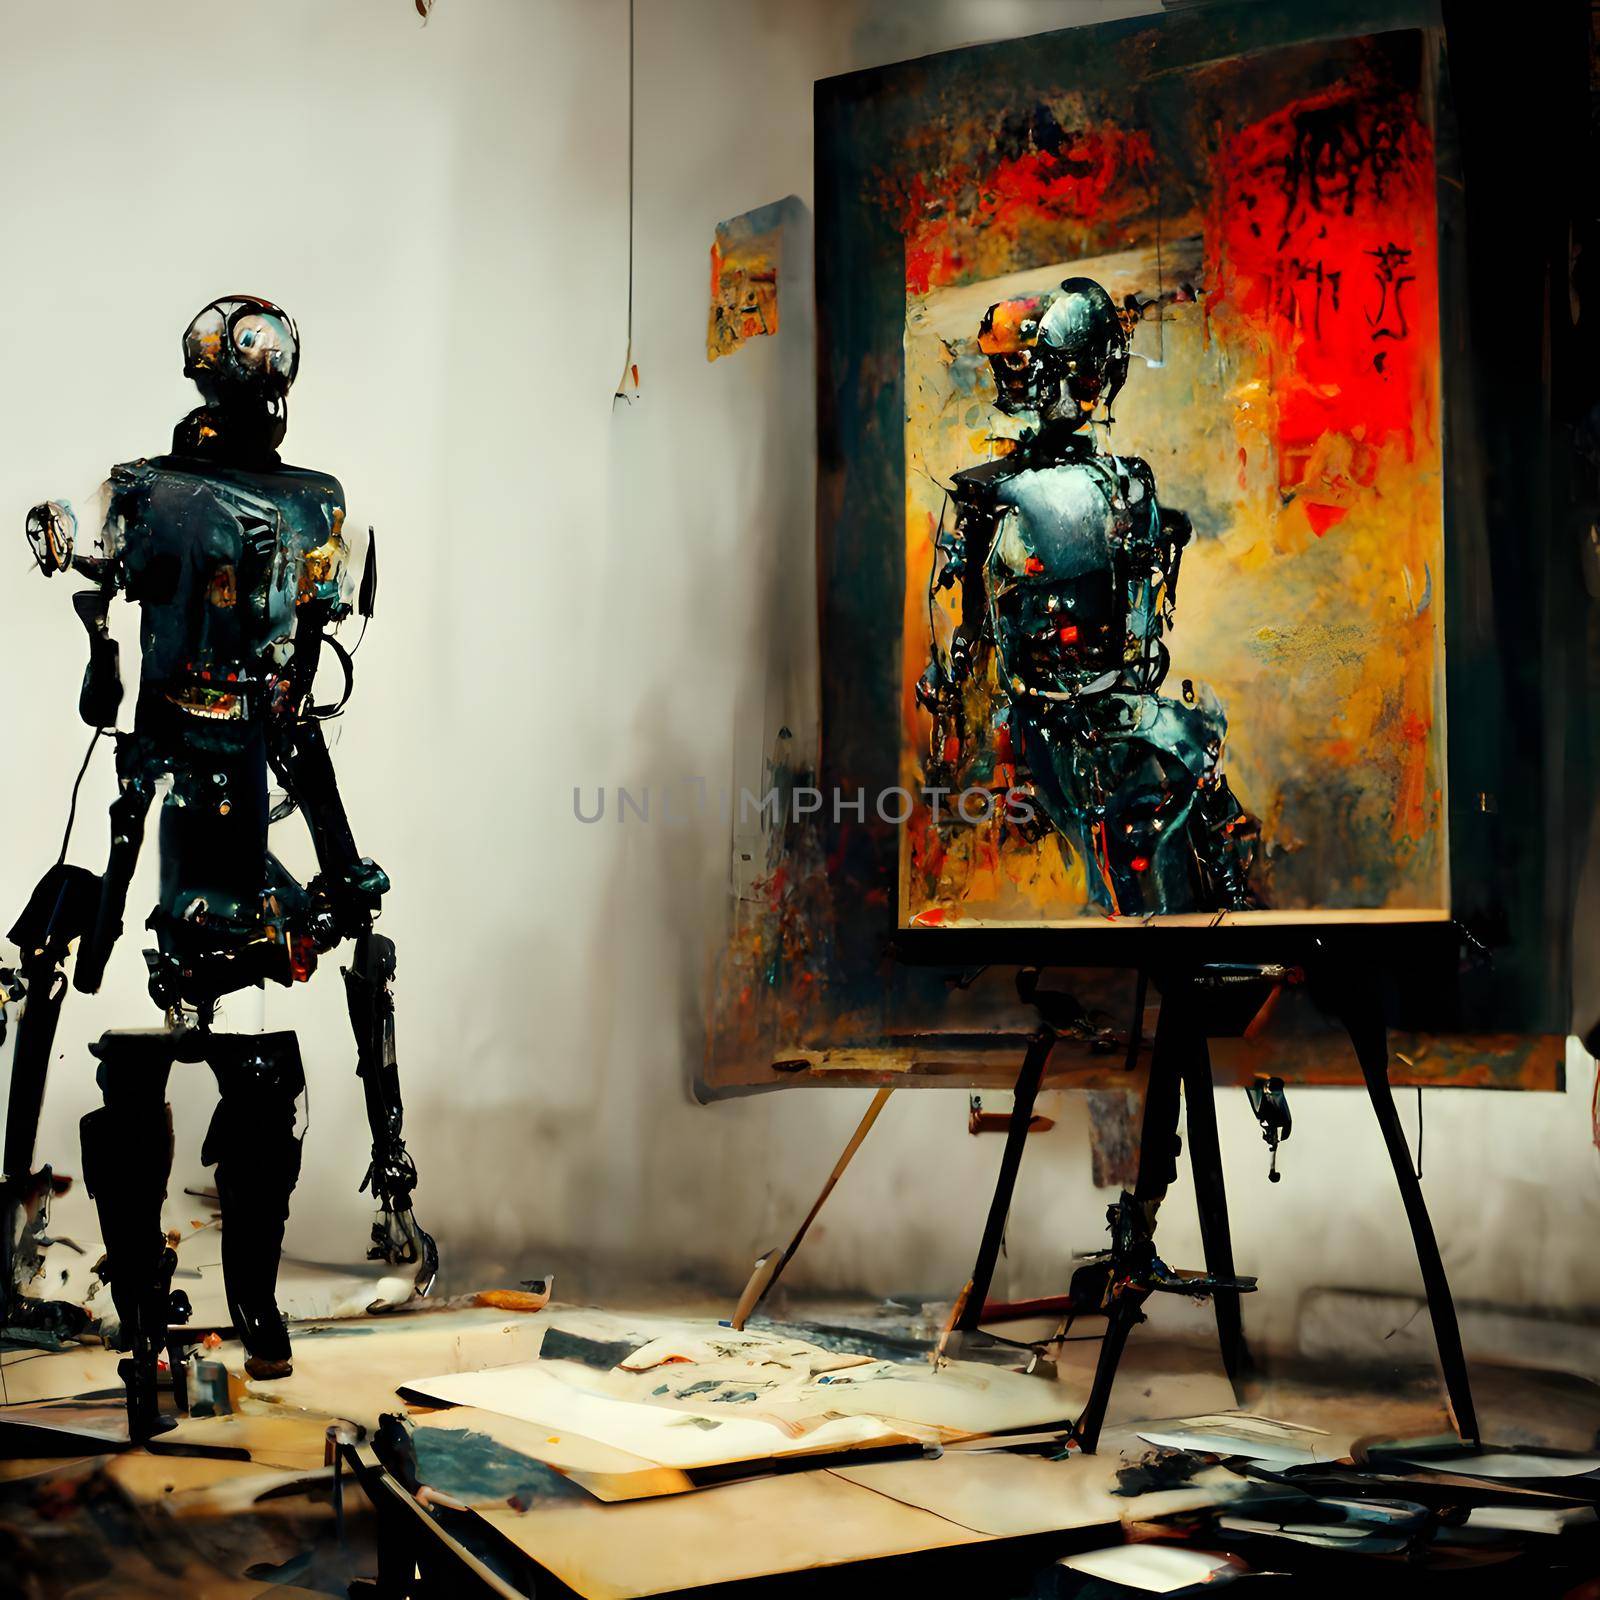 anthropomorphic robot artist in the studio next to the easel, painting and paints while working - neural network generated art, picture produced with ai in 2022